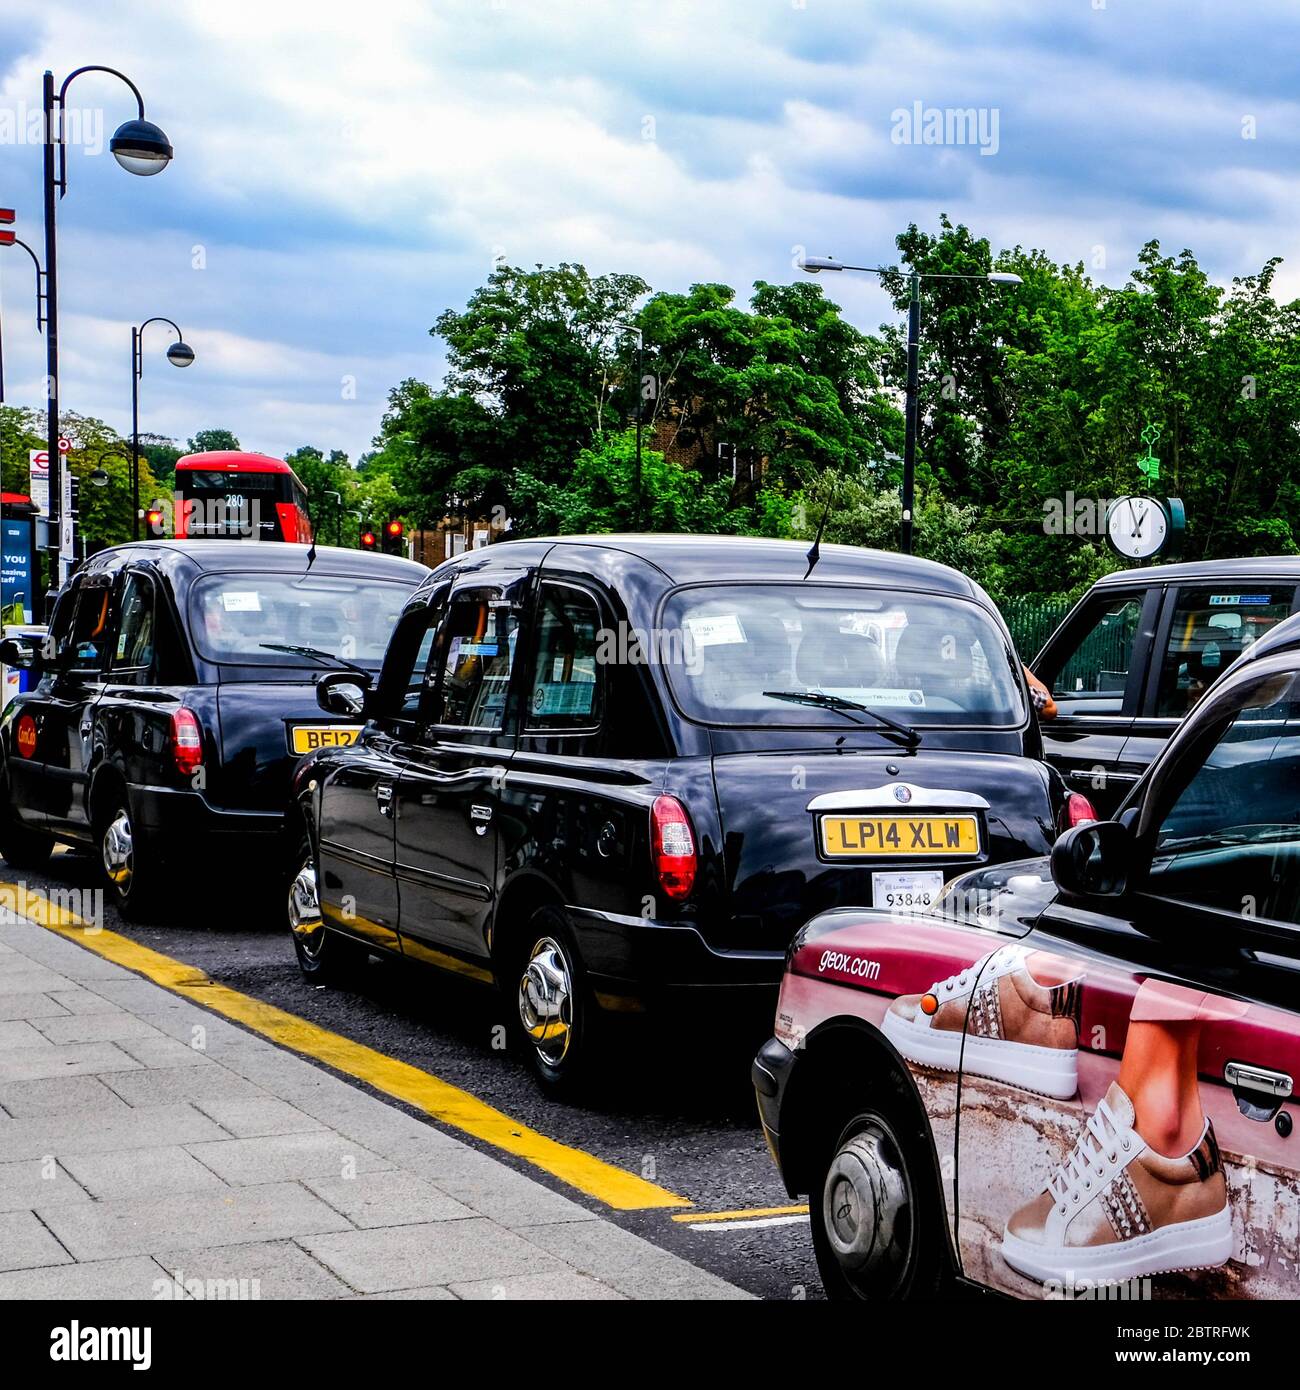 Traditional London Black Cabs Parked, Waiting For A Fare, with No People Stock Photo